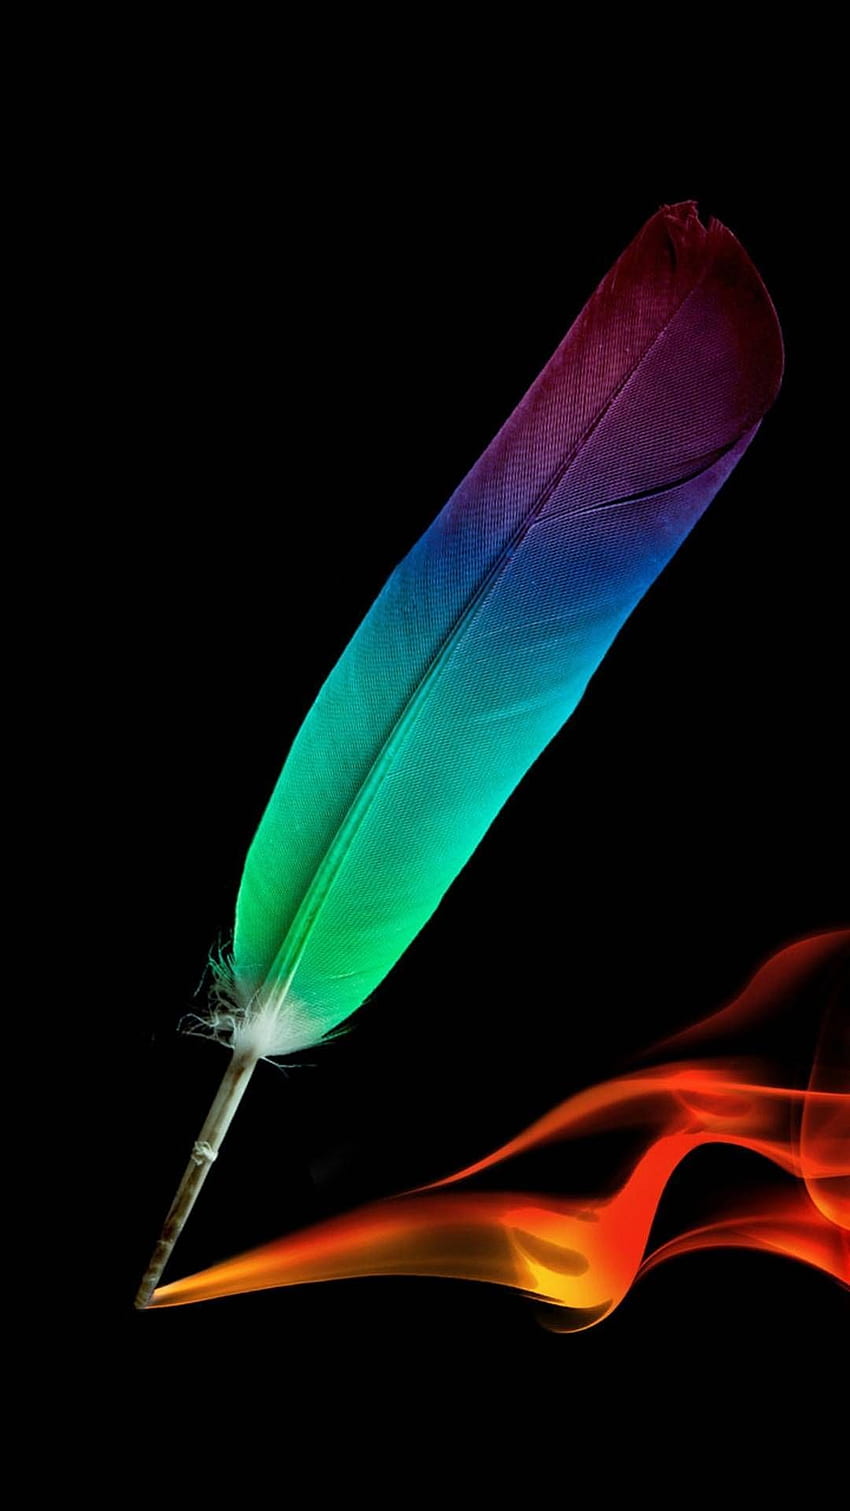 iPhone . Feather, Blue, Quill, Pen, Alat tulis wallpaper ponsel HD